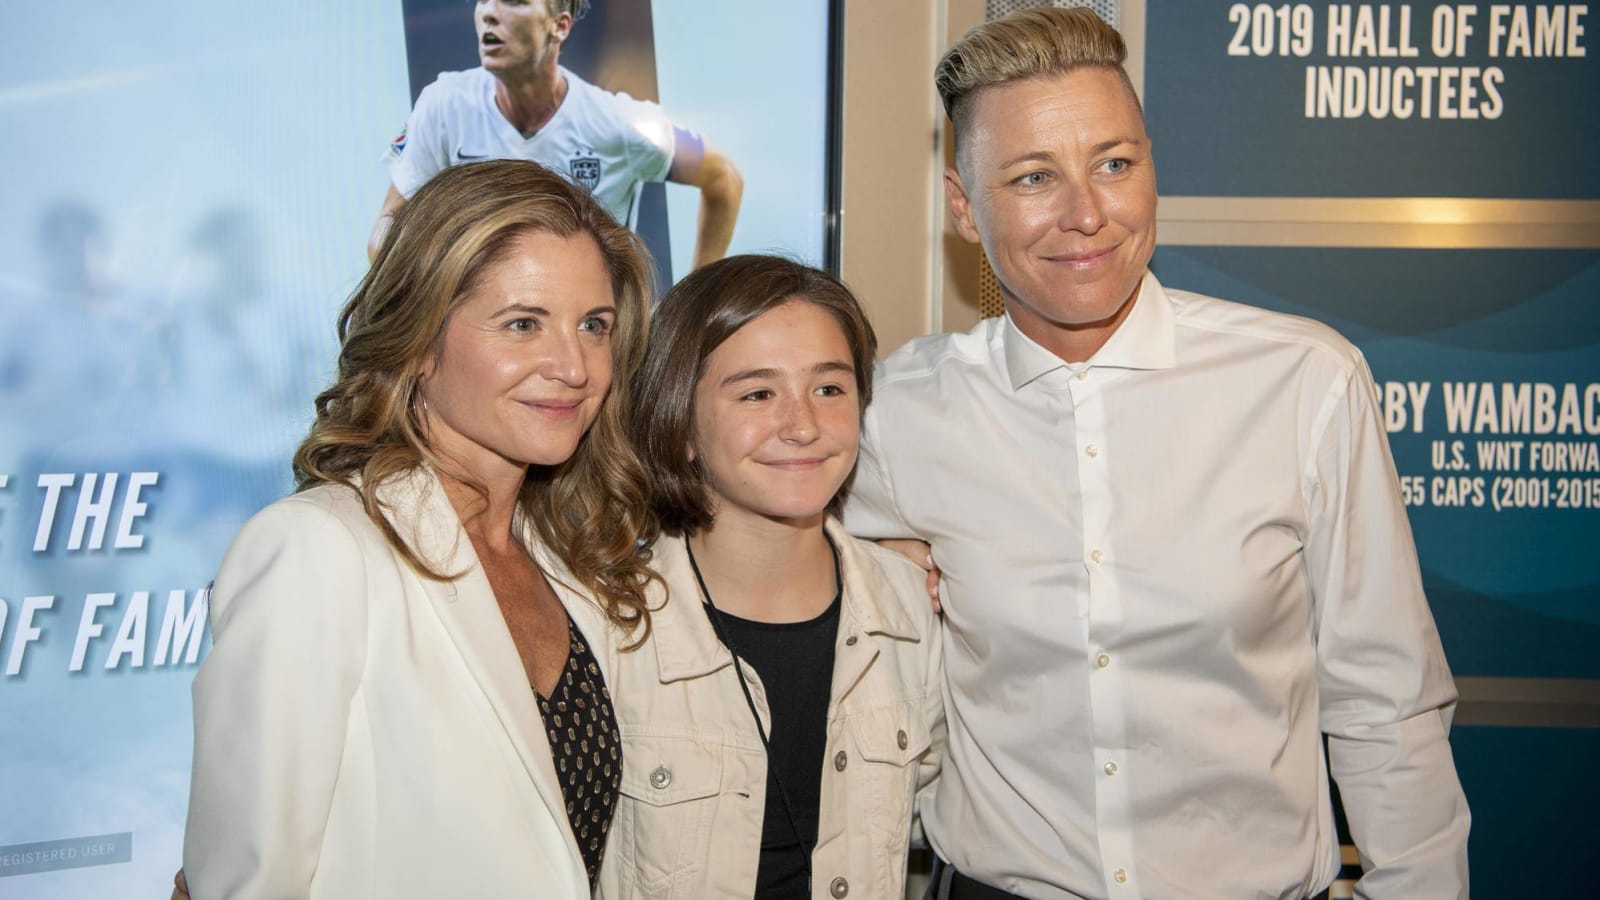 Glennon Doyle: Cheering for wife Abby Wambach in NYC Marathon 'one of the best days of my life'